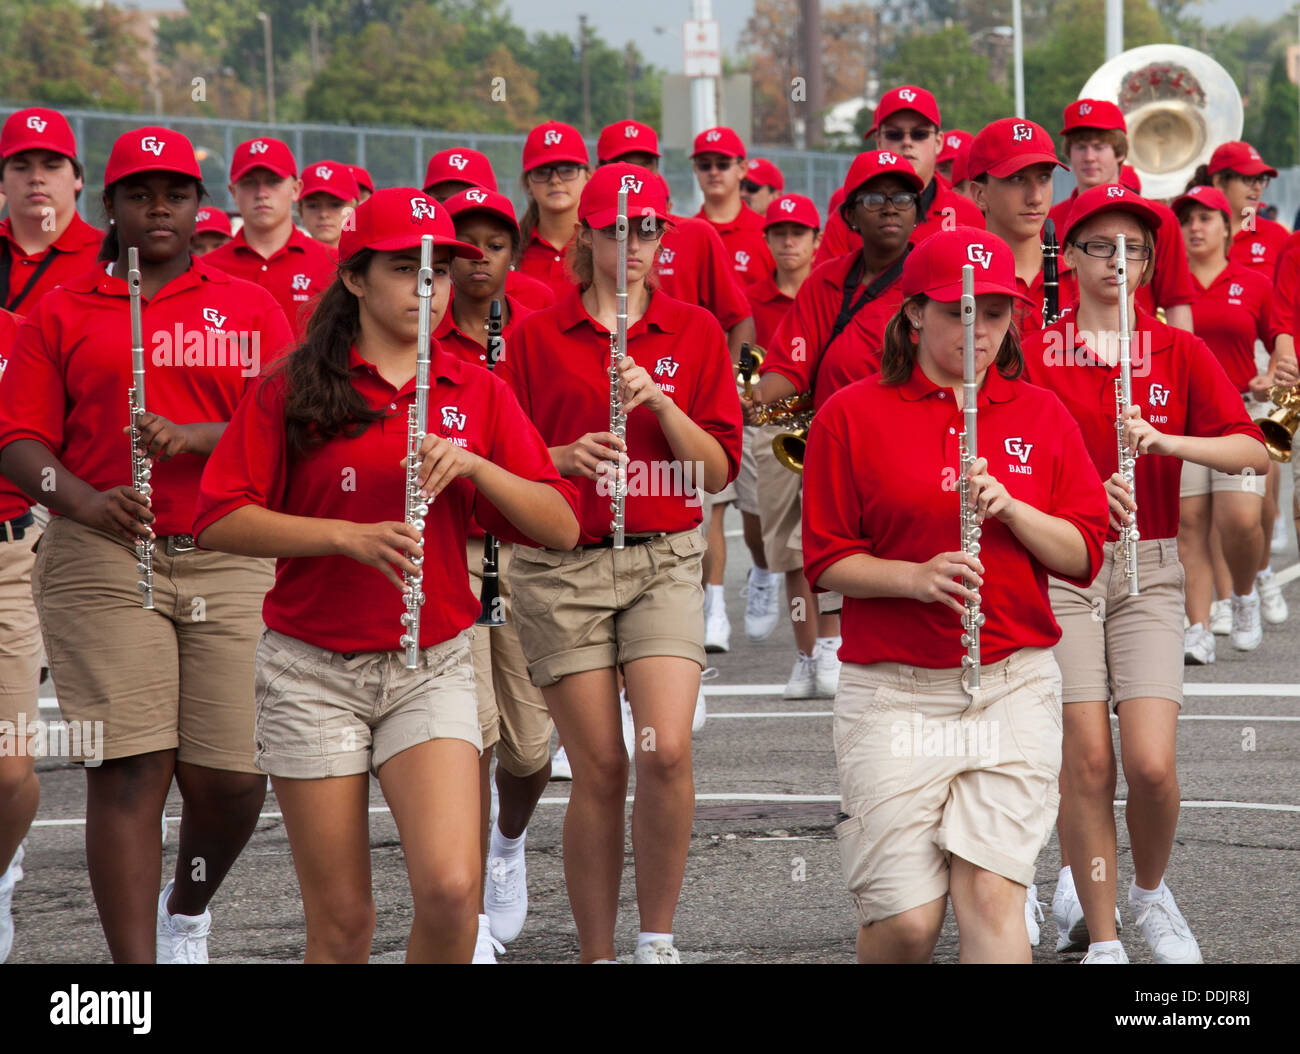 Detroit, Michigan - The Chippewa Valley High School marching band in Detroit's Labor Day parade. Stock Photo